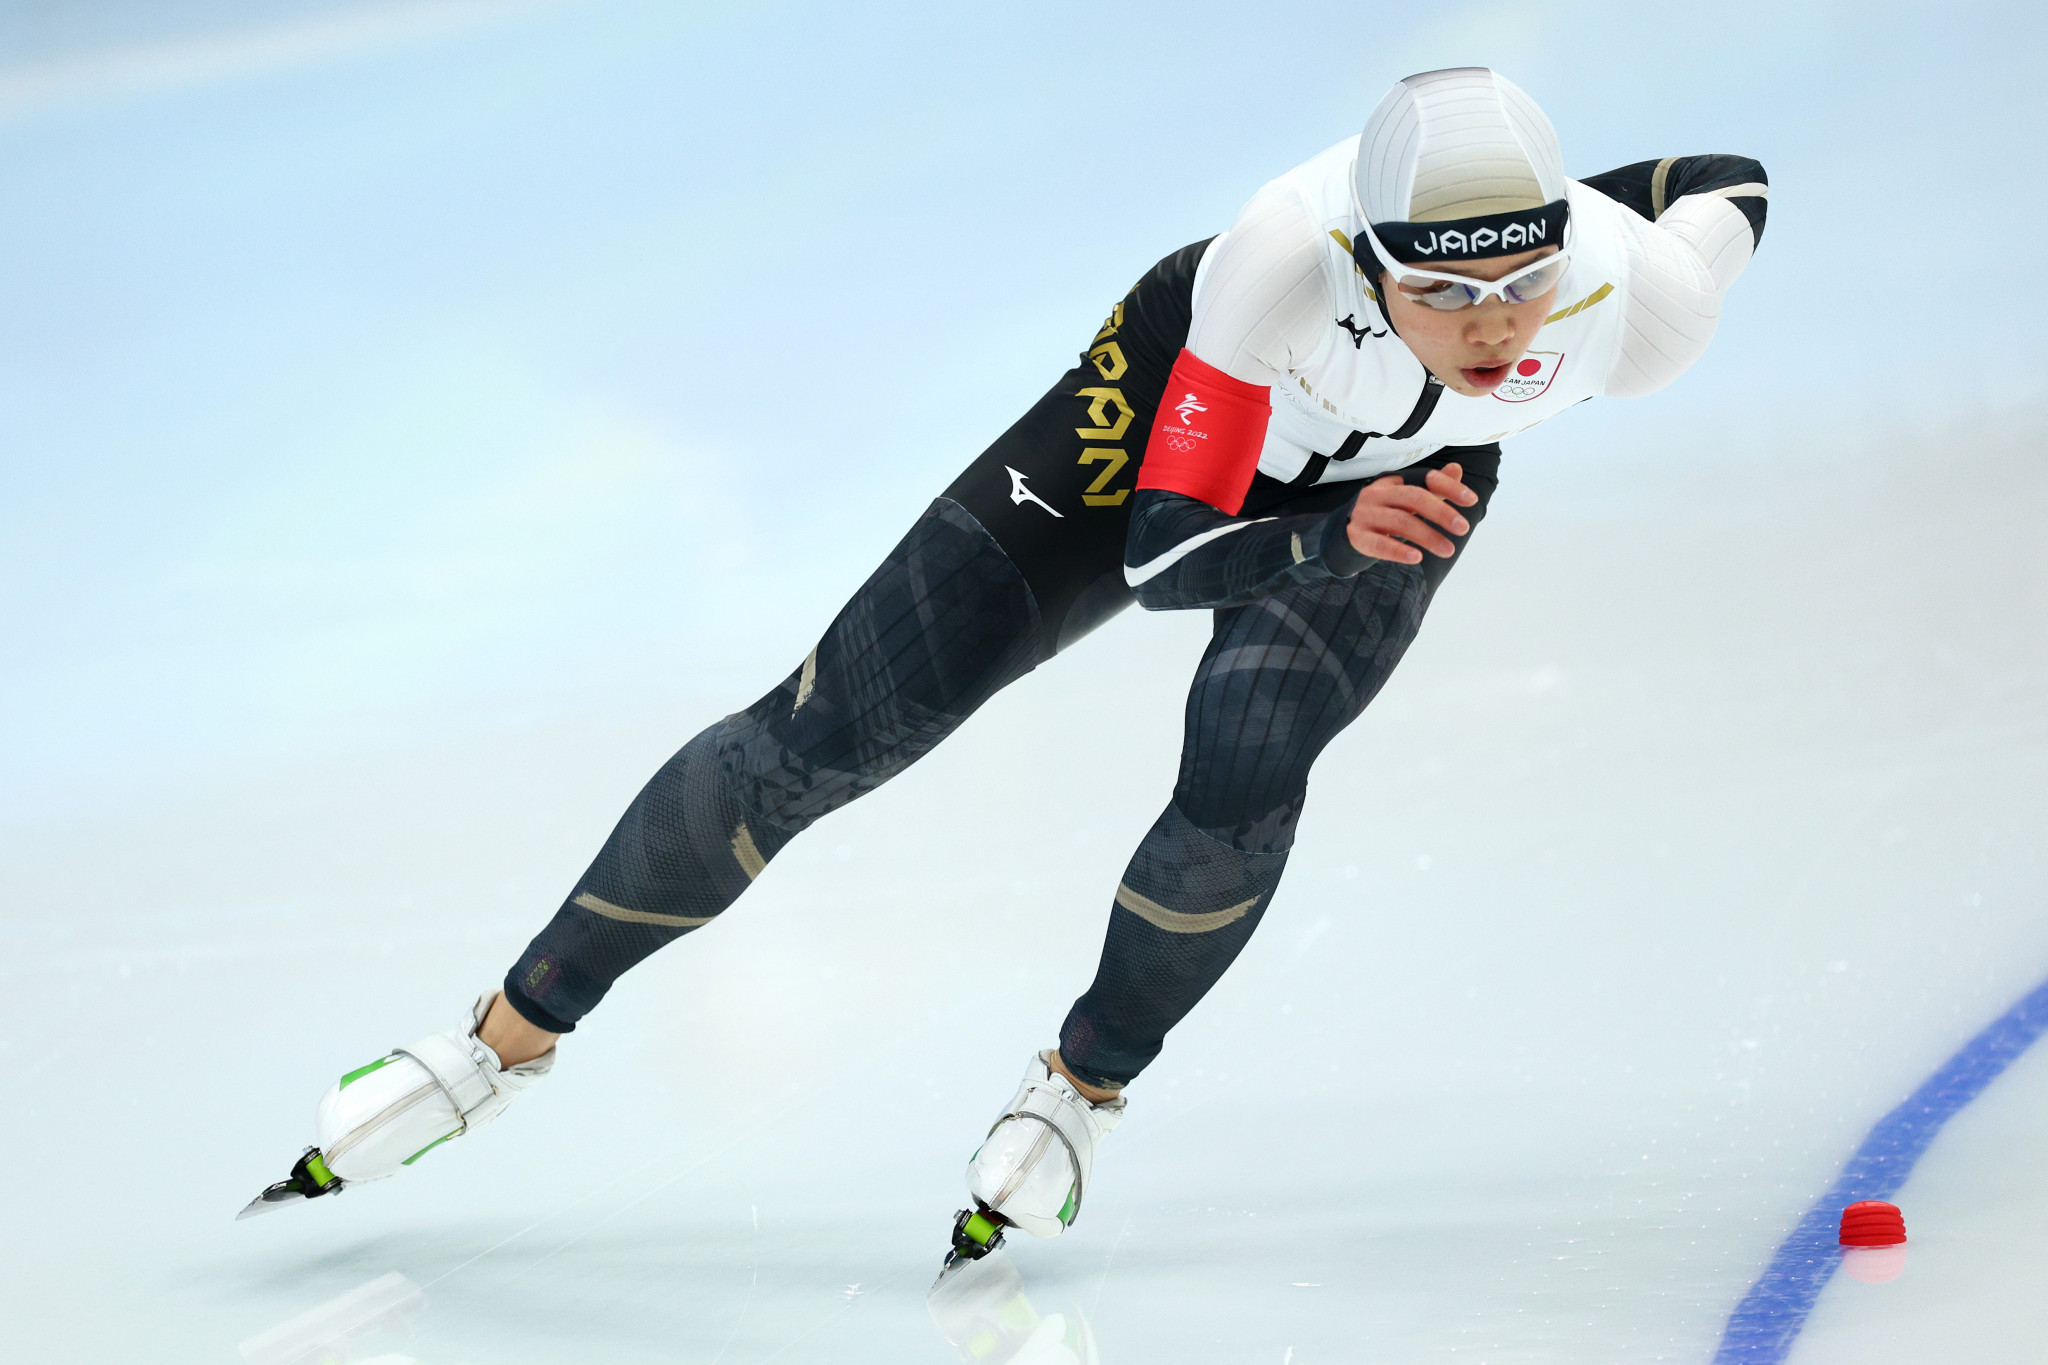 Japan's Nana Takagi retired from speed skating after a career spanning three Olympics ©Getty Images